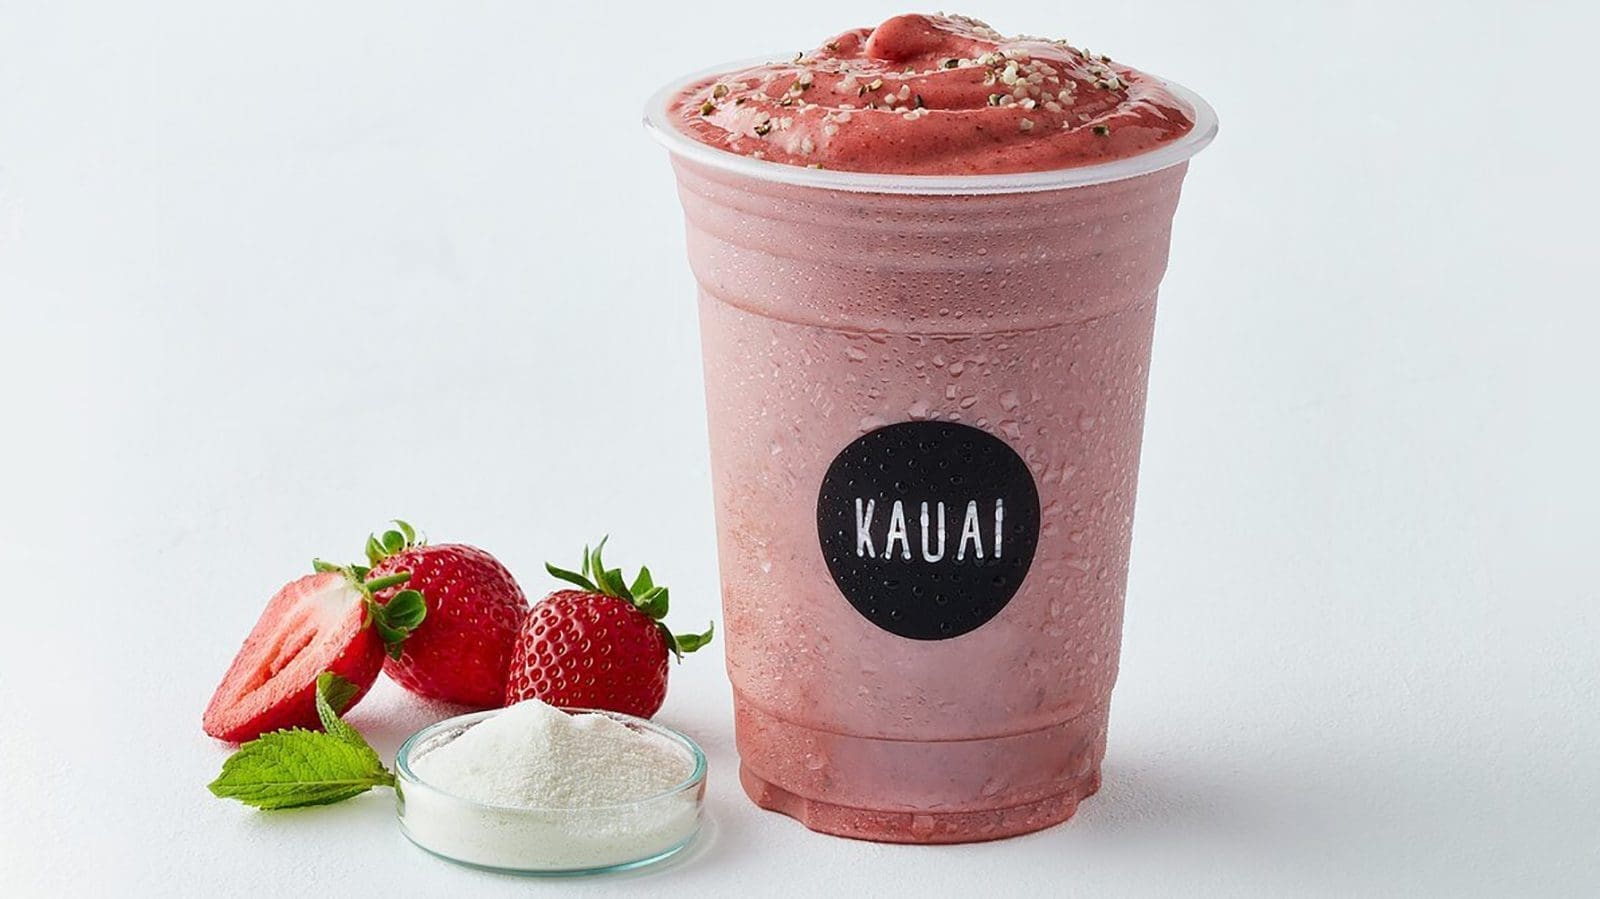 Fitness brand Virgin Active acquires long-time healthy food offering partner Kauai, Nü